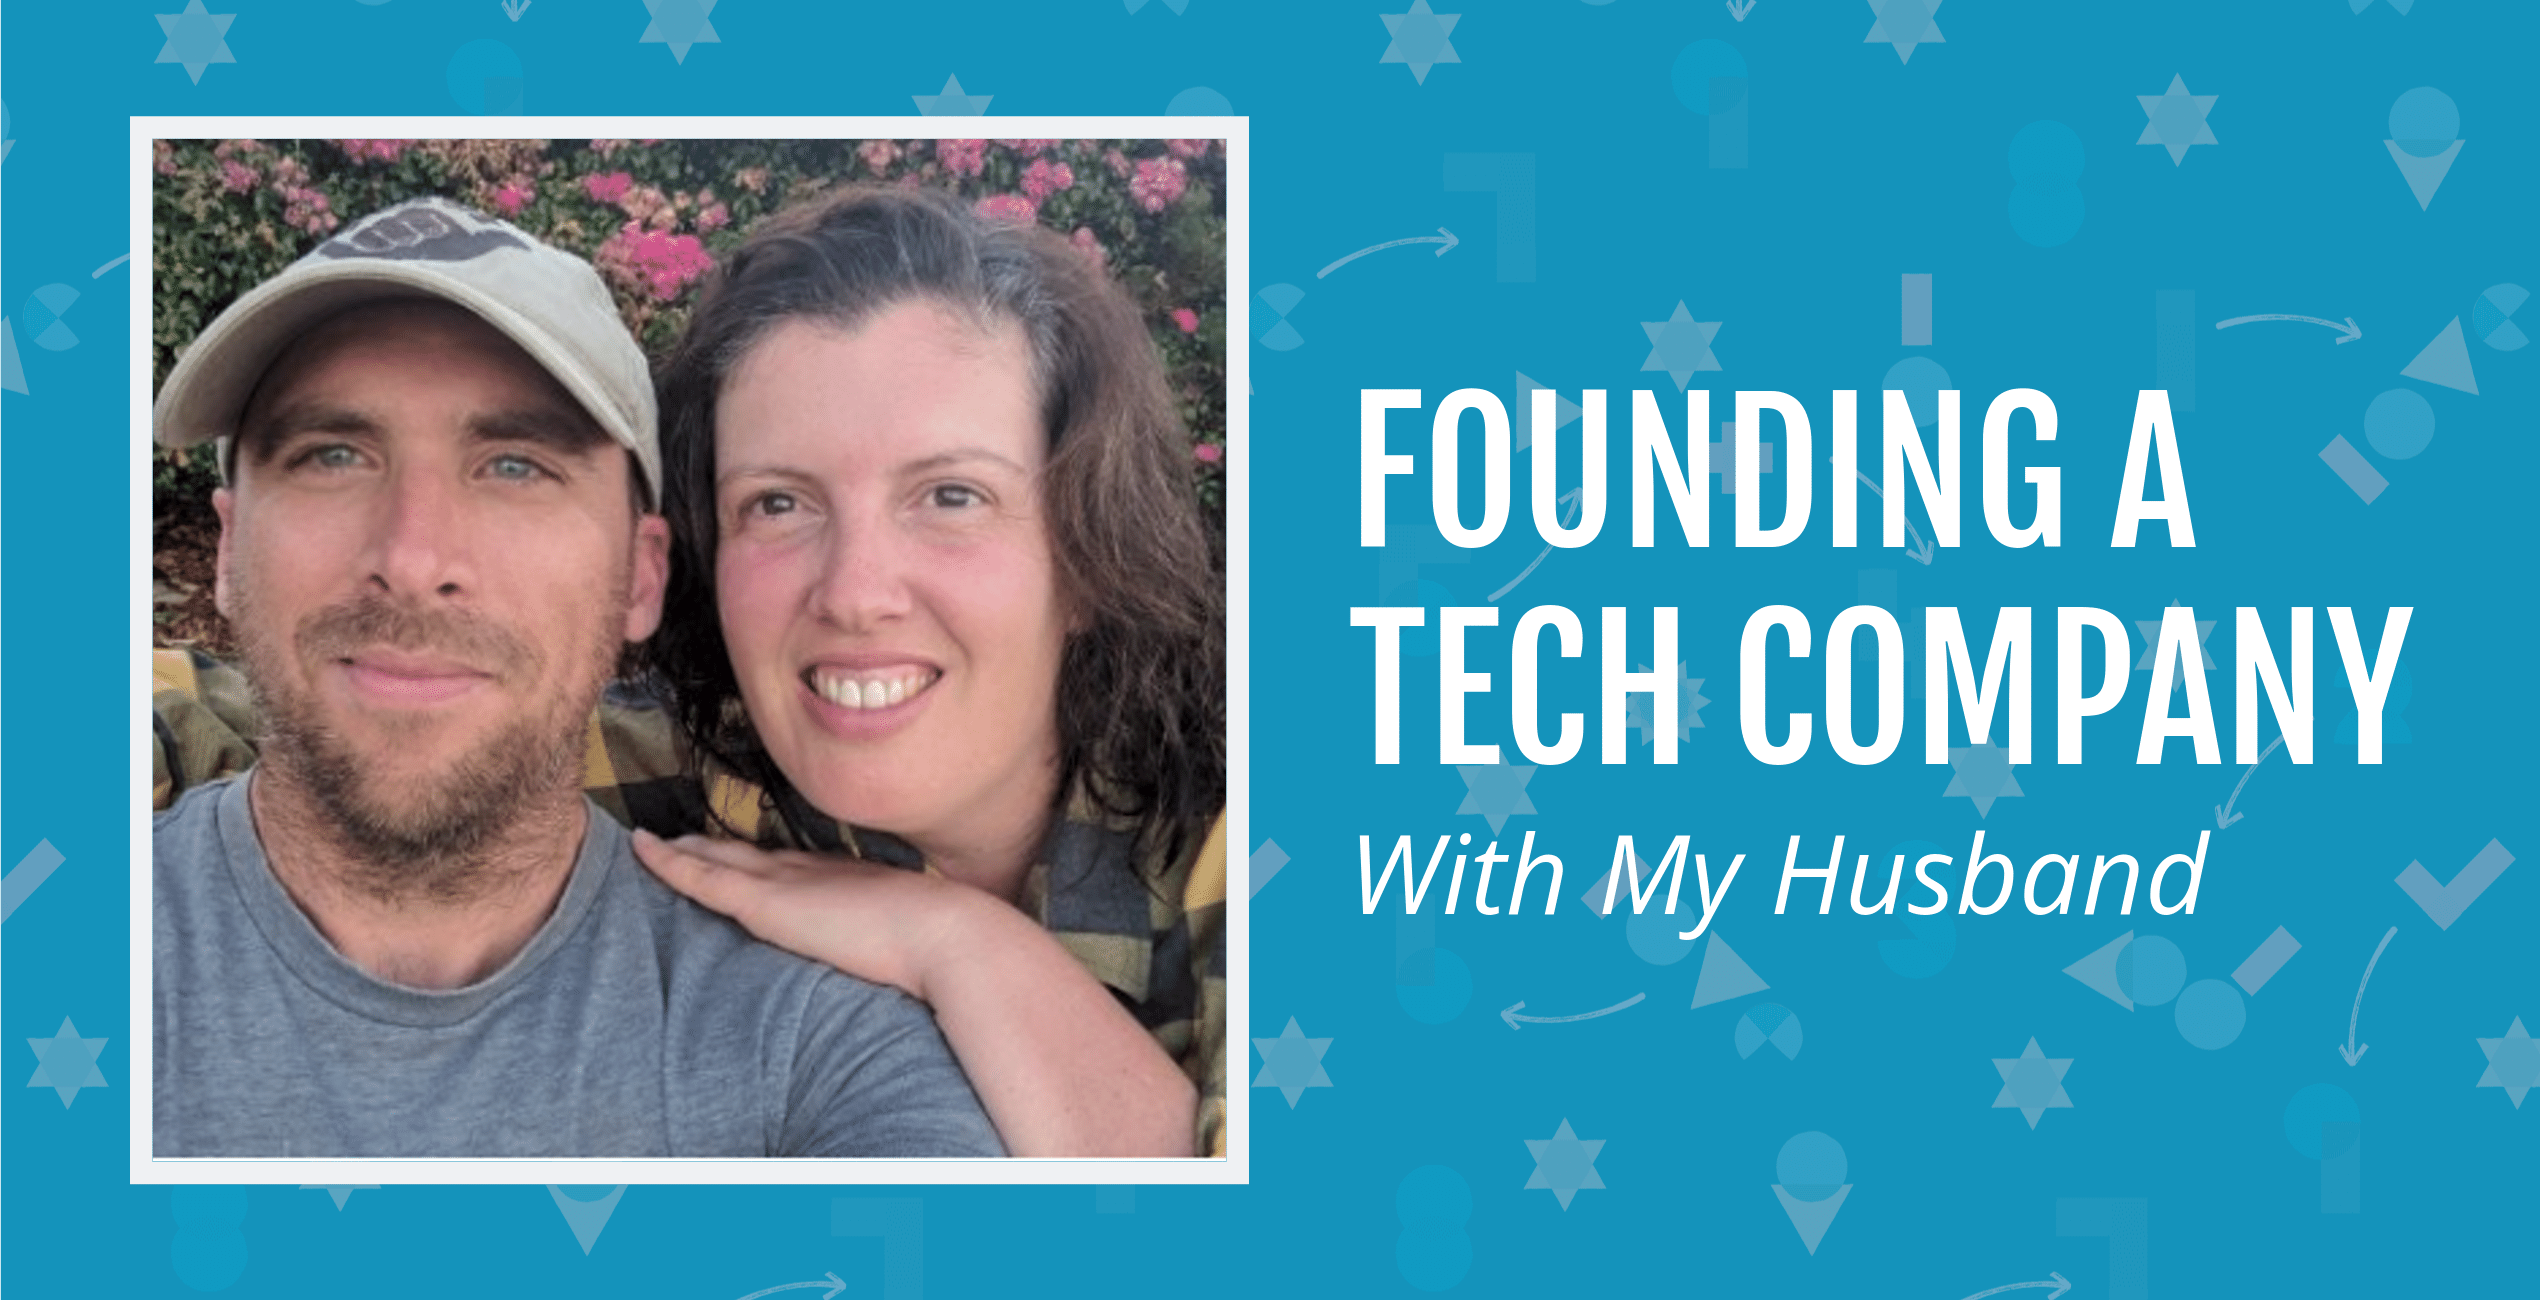 Some Thoughts on Founding a Tech Company with my Husband